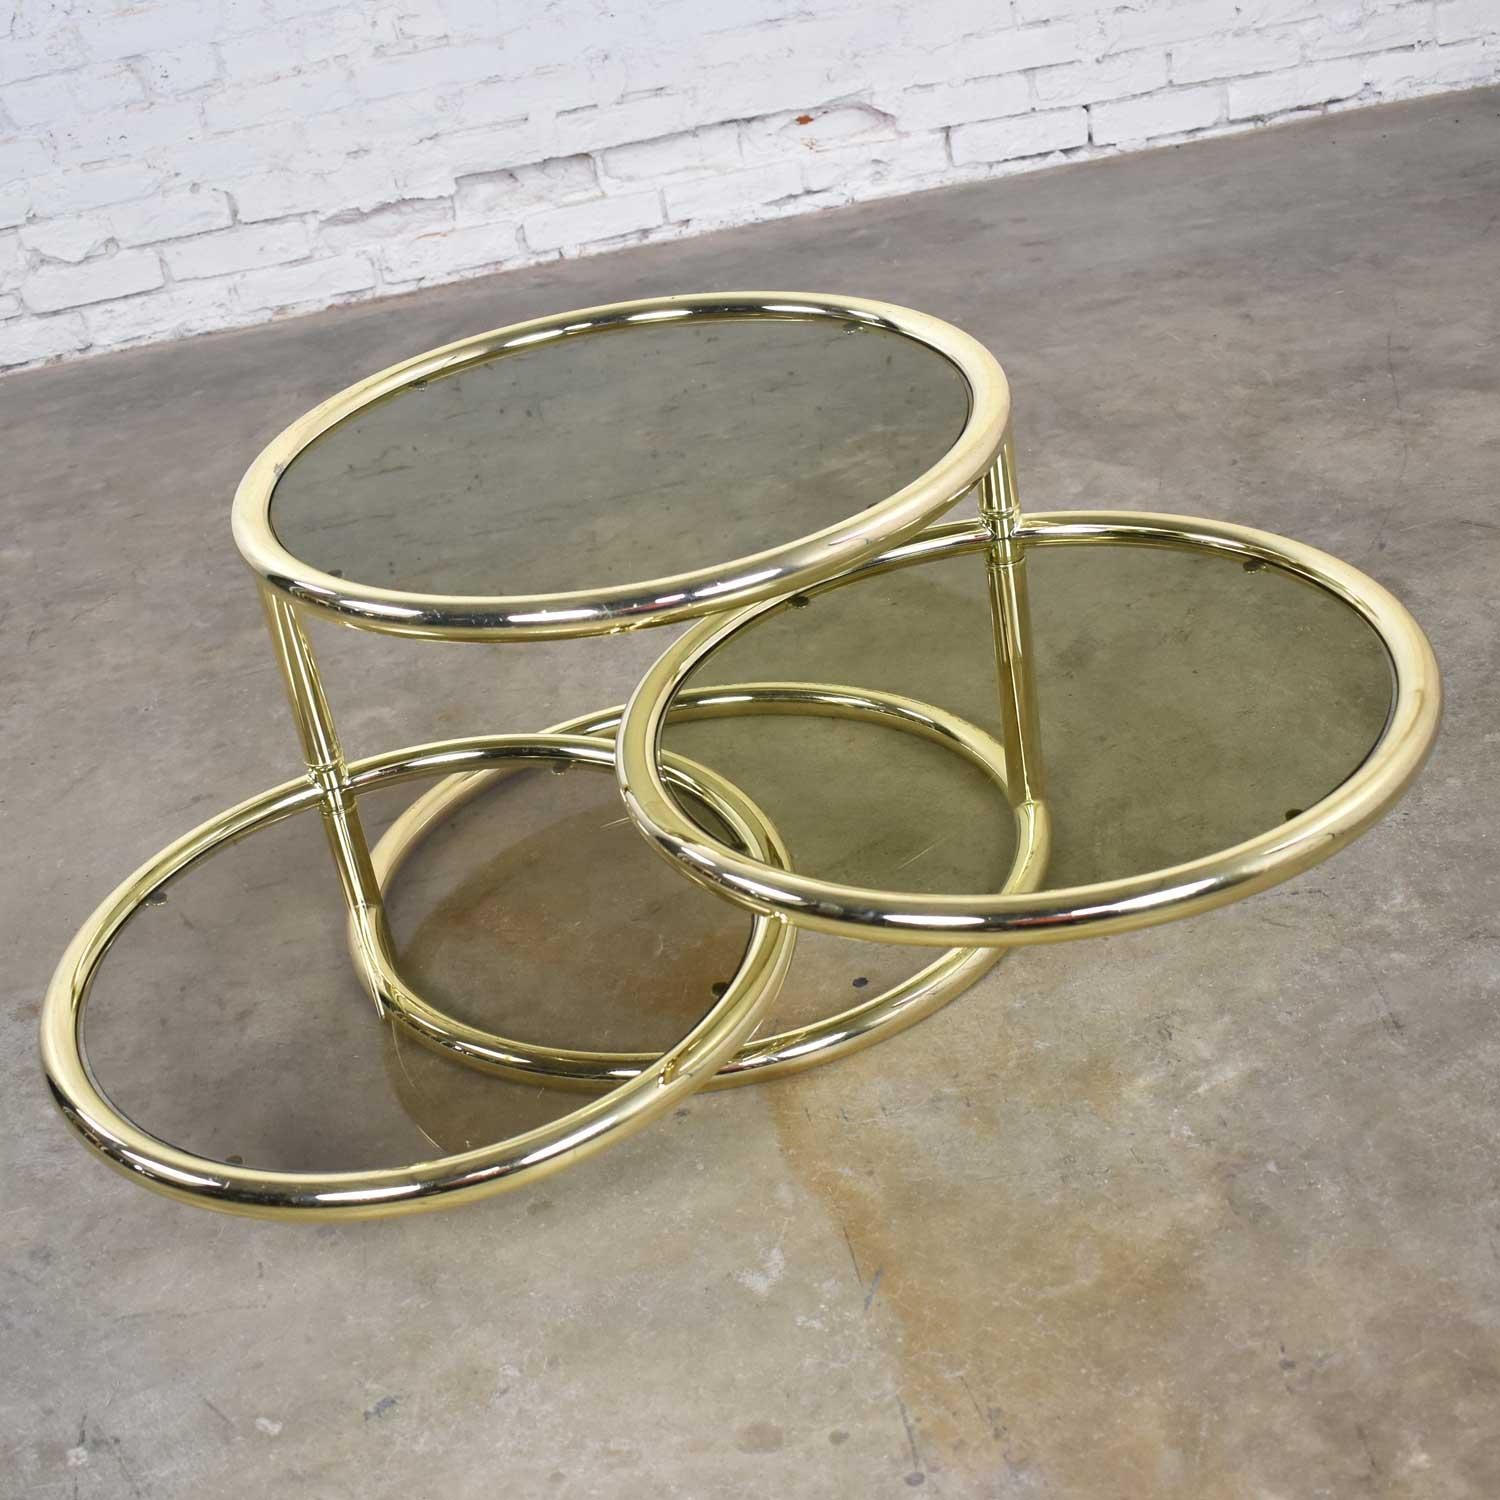 Handsome vintage modern round coffee table, end table, or side table with pivoting tiers in brass tube and smoke glass. It is in wonderful vintage condition. The brass plating has some wear where the steel beneath can be seen but does not detract